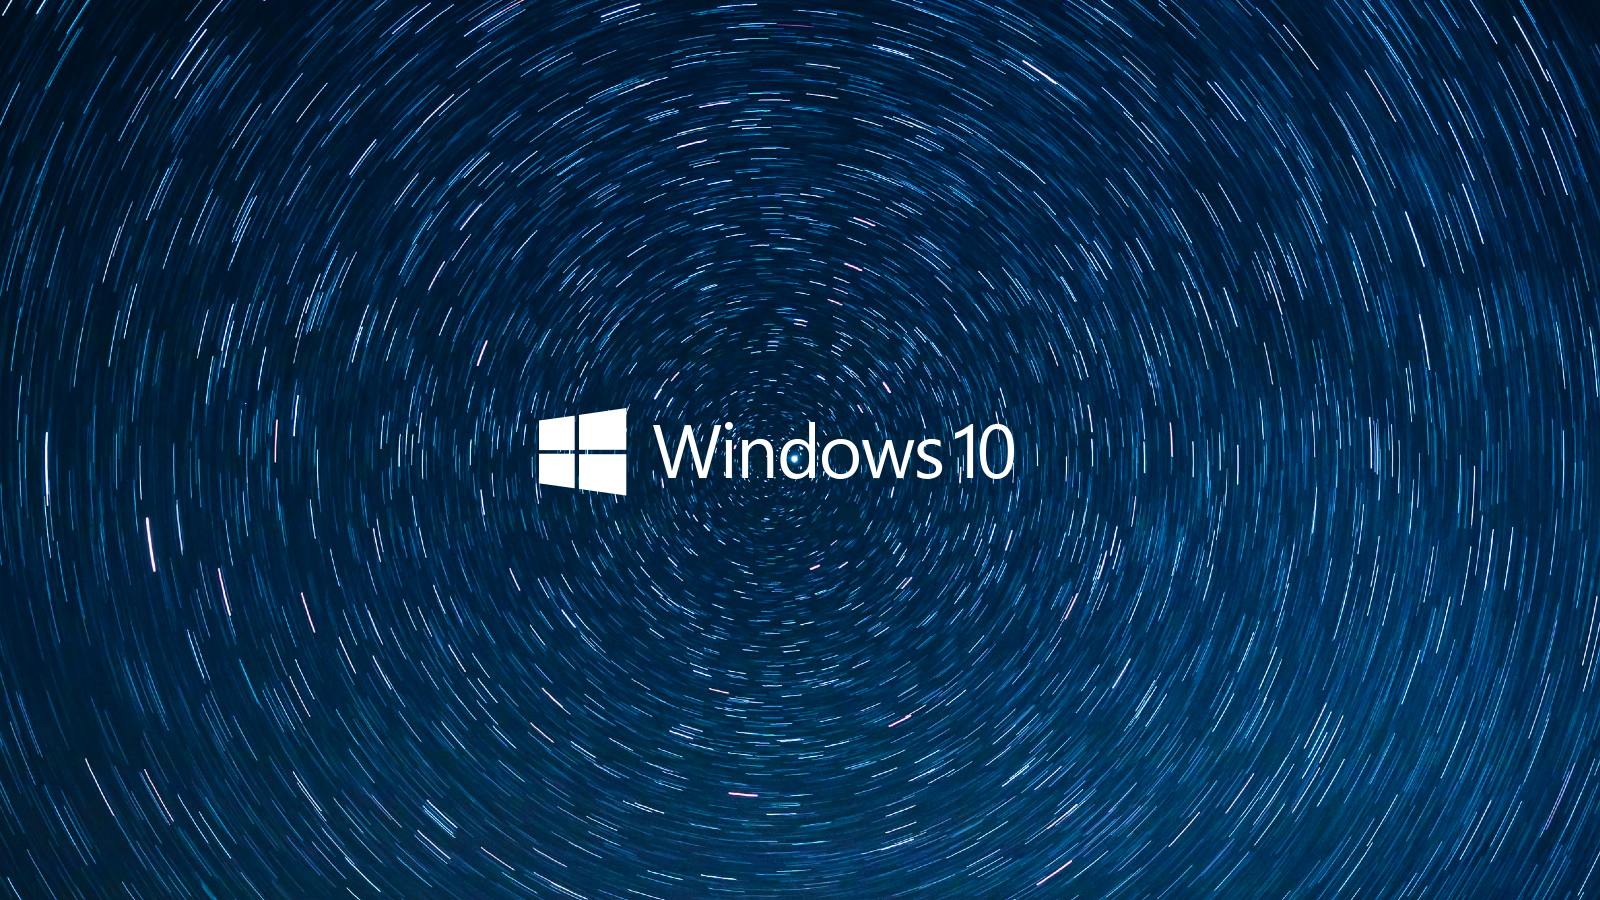 Customize your Windows 10 experience with these free apps